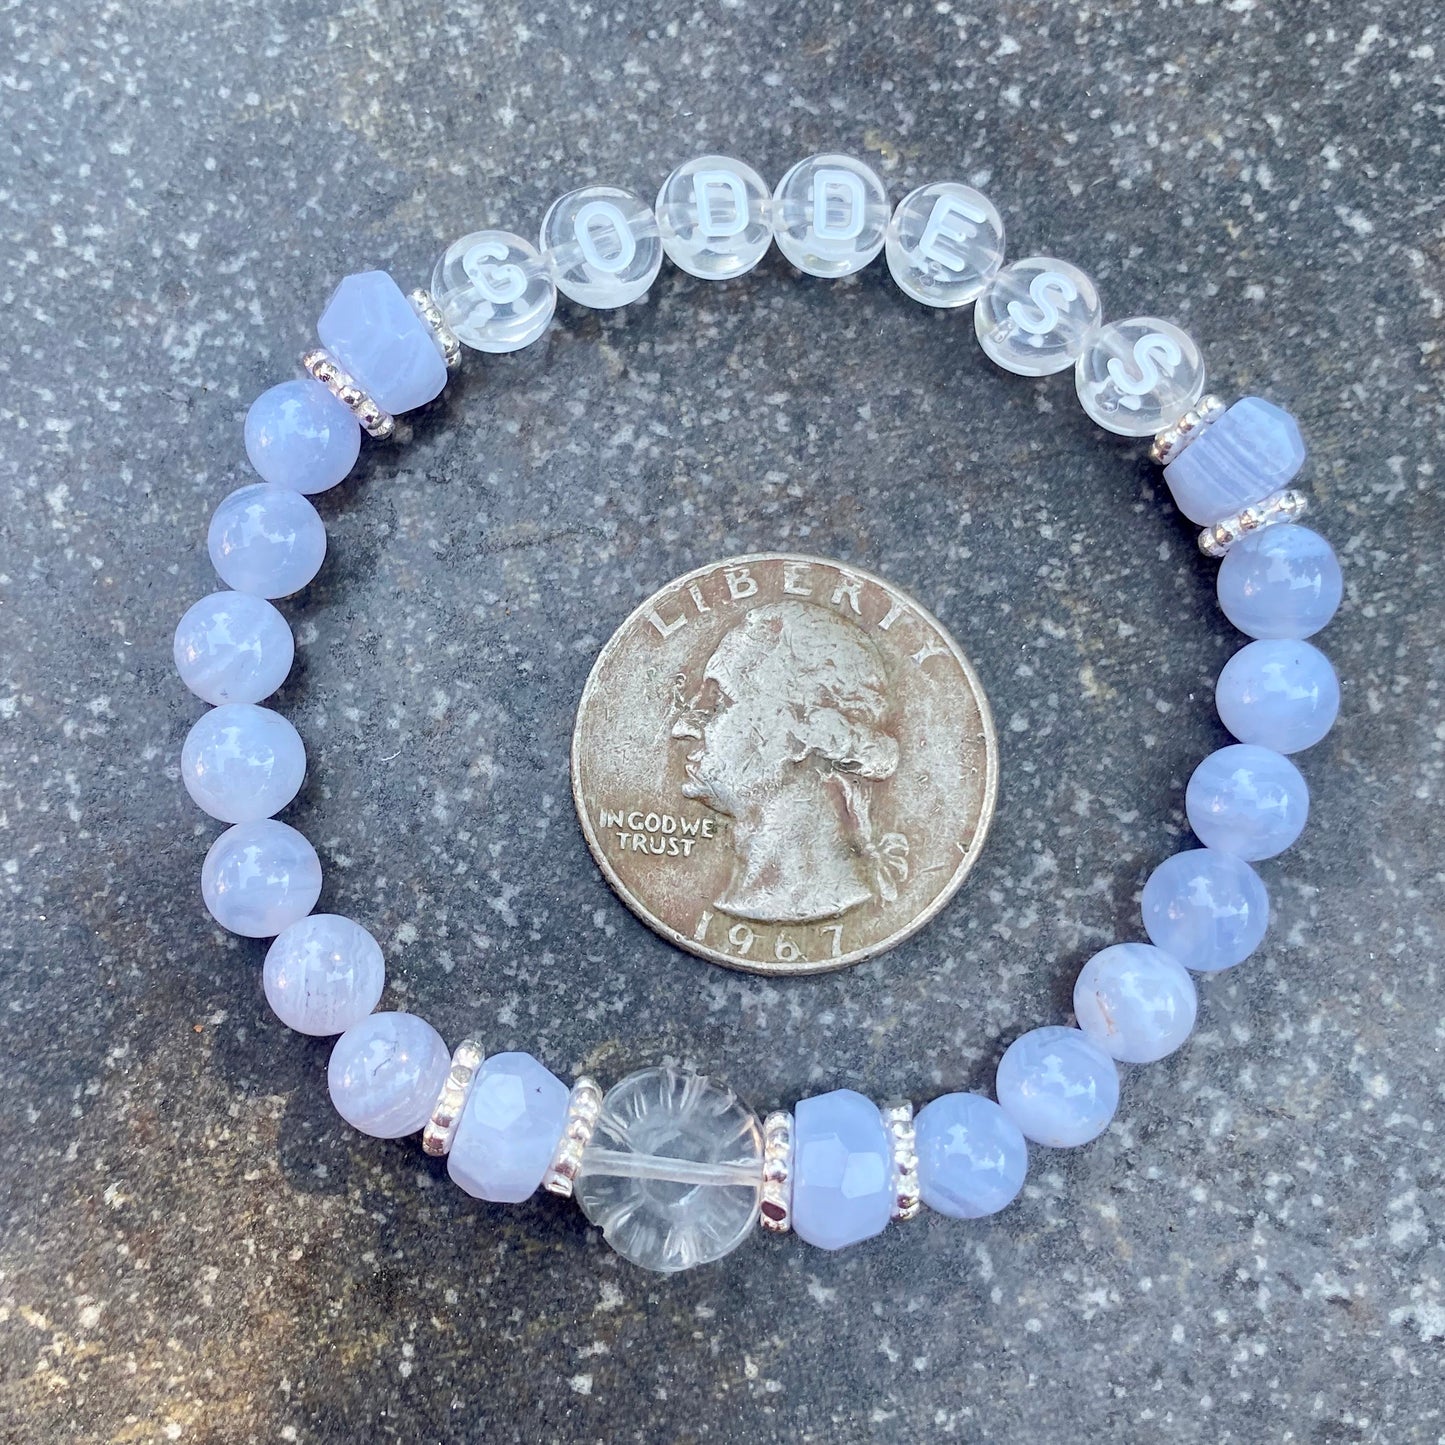 Blue Lace Agate “Goddess” and Clear Quartz W/ Sterling Silver